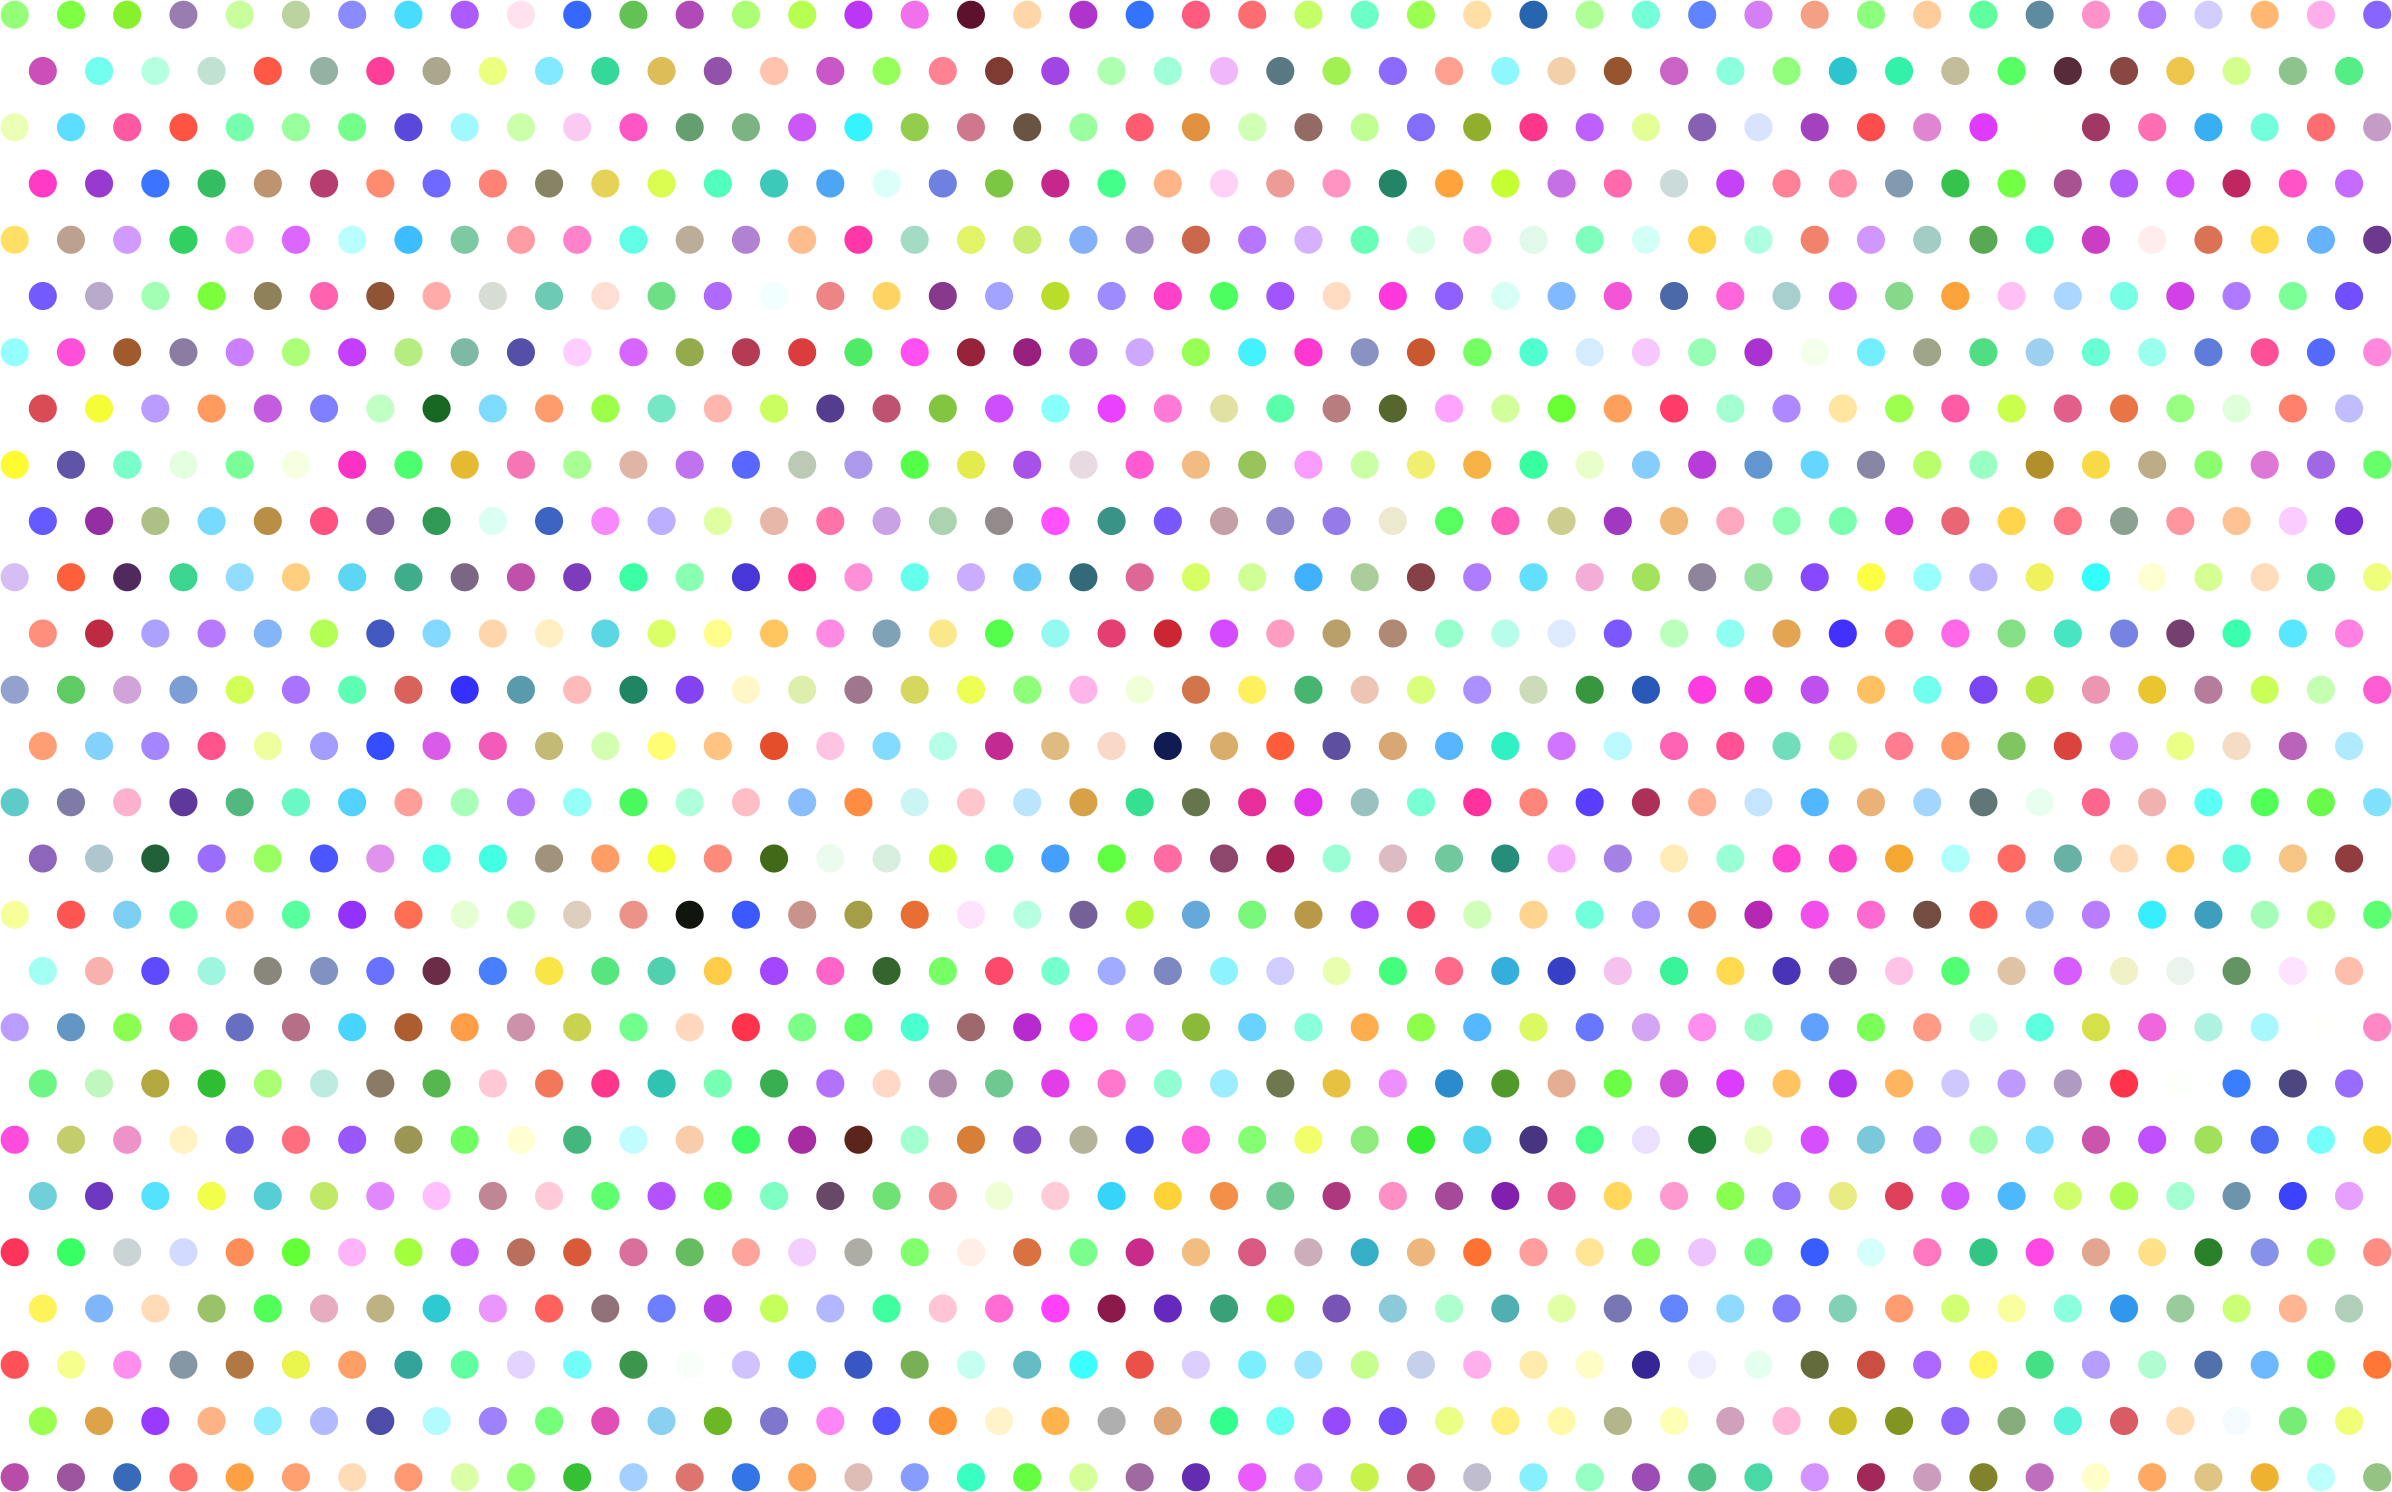 This Free Icons Png Design Of Prismatic Polka